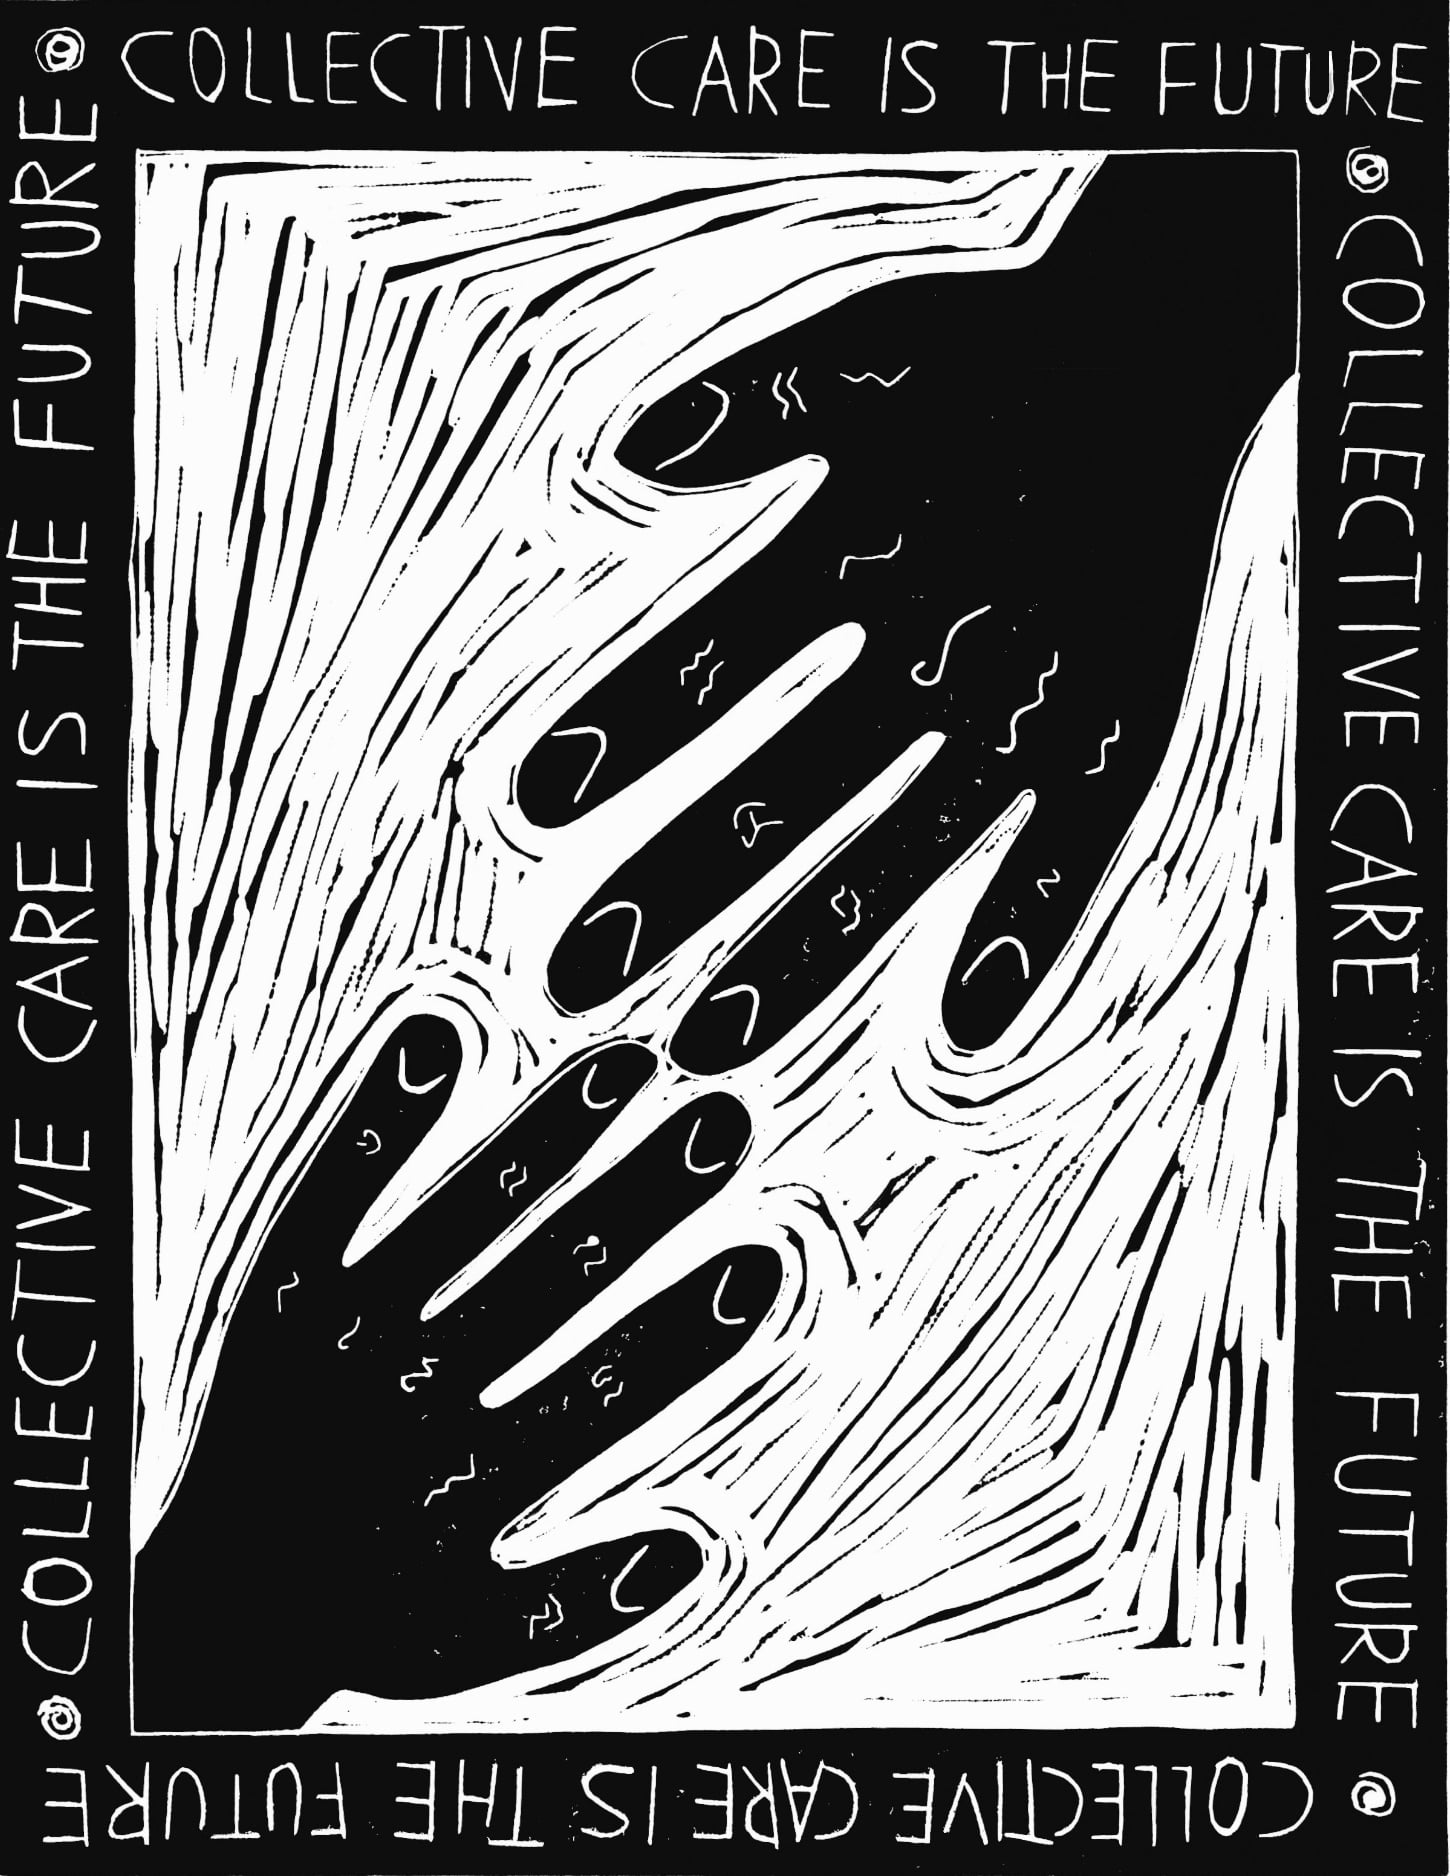 A black and white linocut print in portrait format has a thick black border containing the words repeating on all four sides: “COLLECTIVE CARE IS THE FUTURE”. Inside the border are two hands in black ink coming from the bottom left and top right corners, reaching into the centre. Around the hands are small black lines and marks left by the lino cutting process.